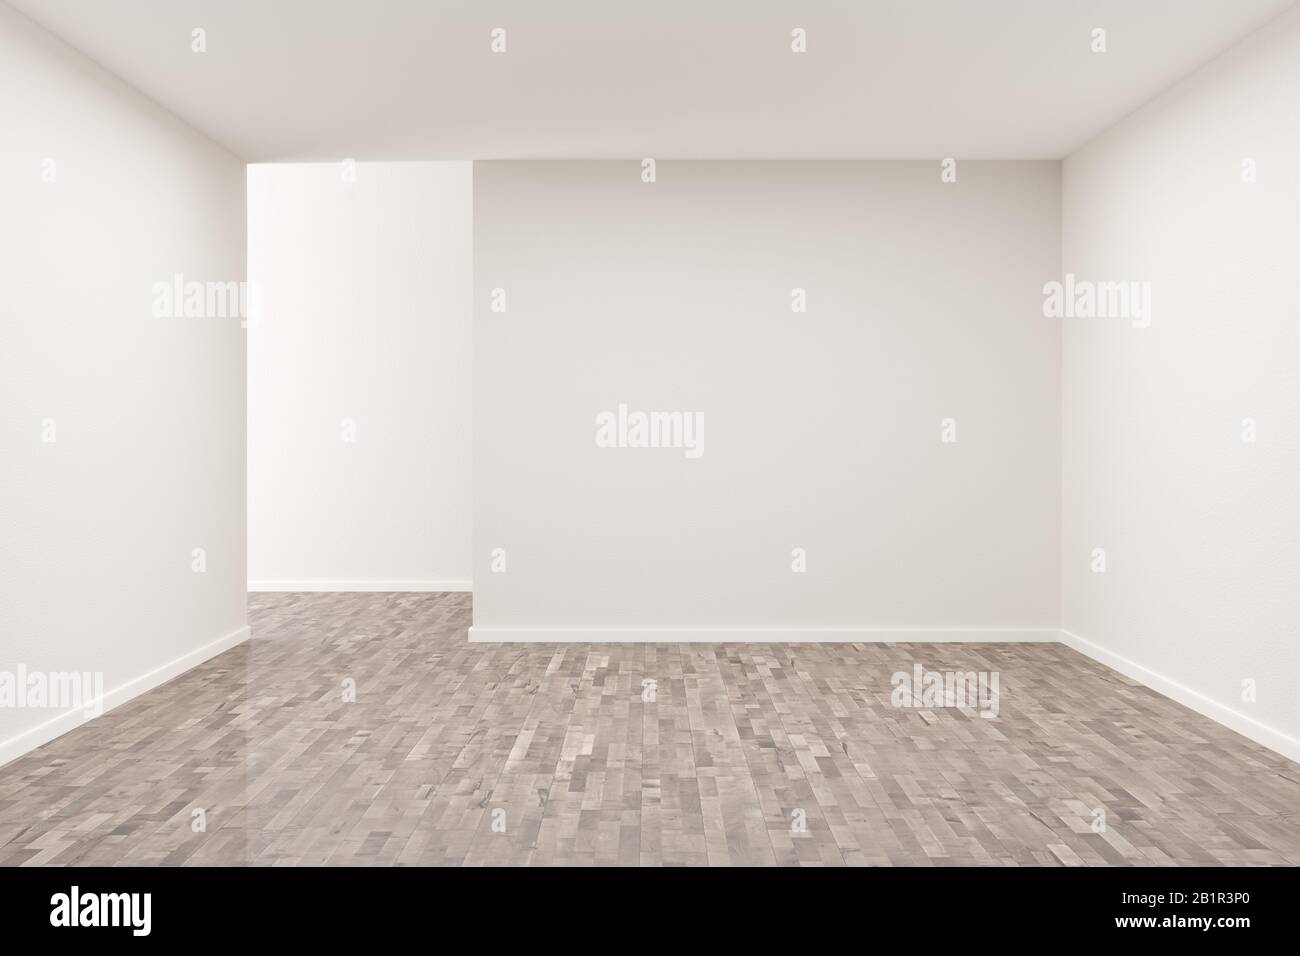 Empty white room with blank walls and brown hardwood floor - presentation or gallery architecture background element, 3D illustration Stock Photo